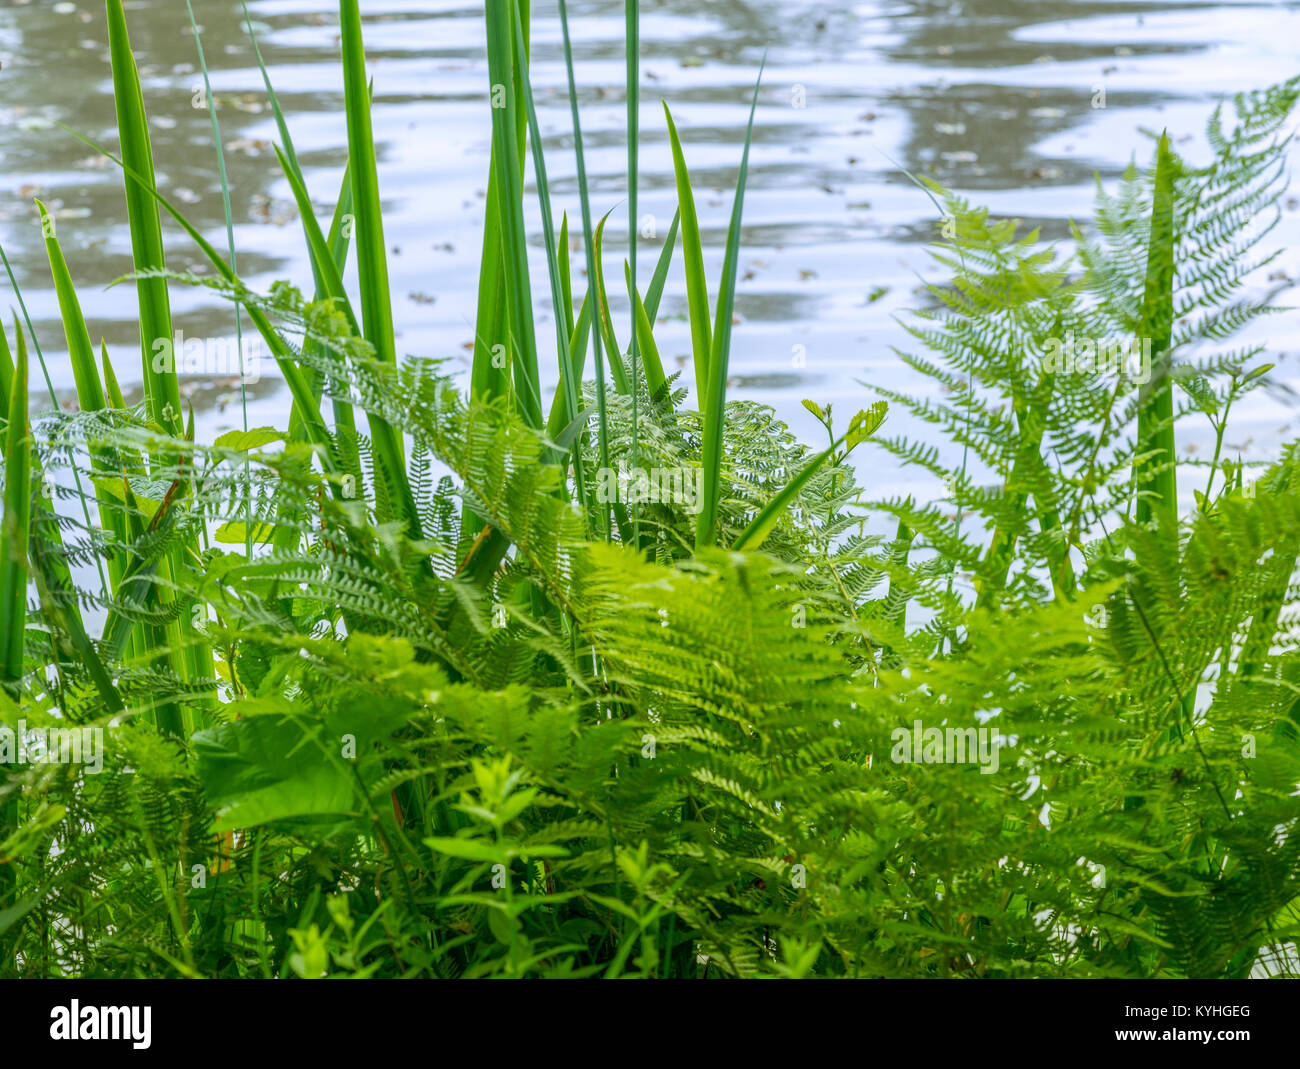 outdoor scenery showing some green riverine vegetation at a lake Stock Photo